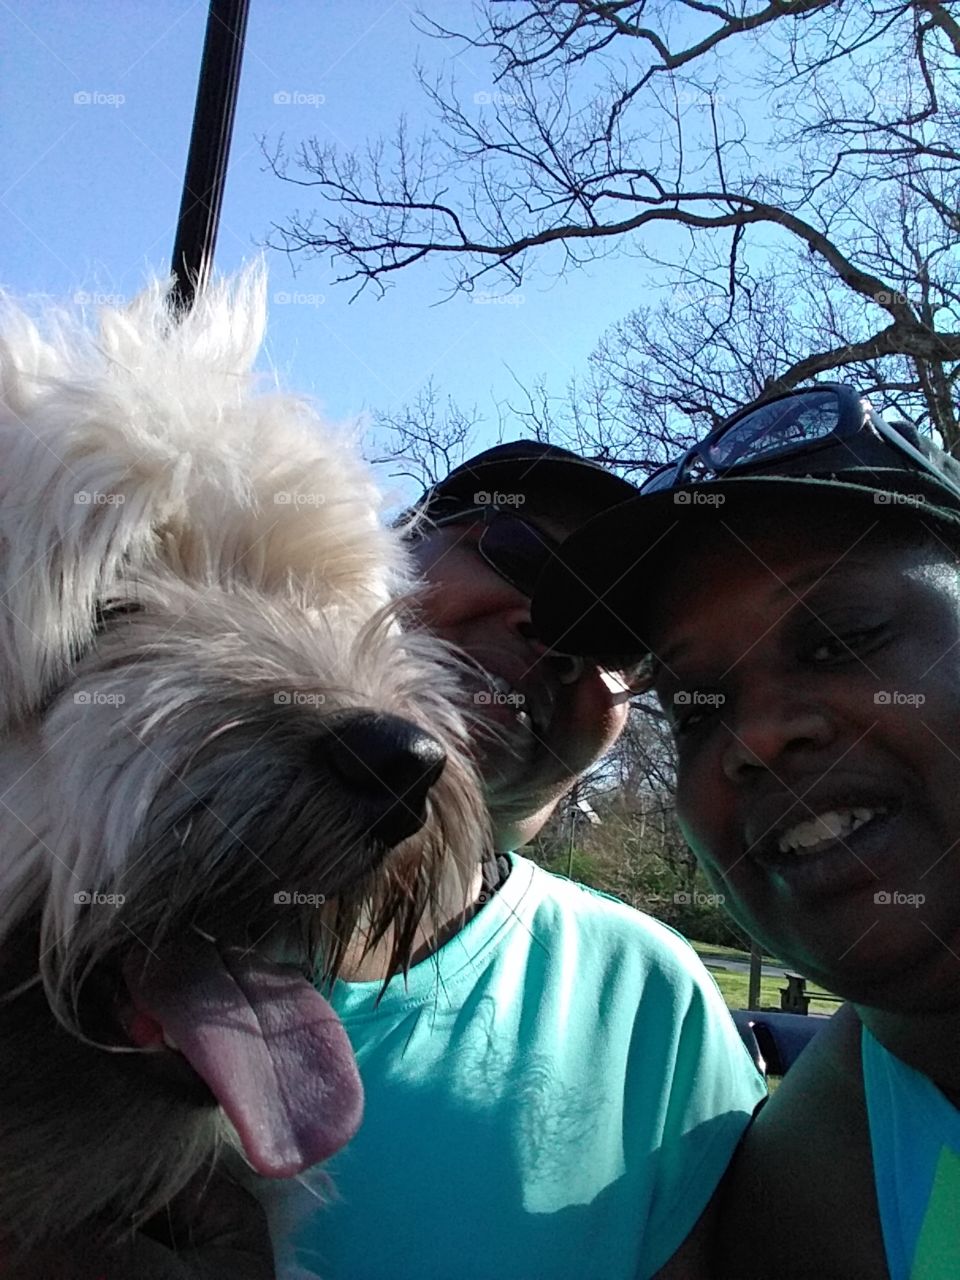 A Day At The Park With Teddy!